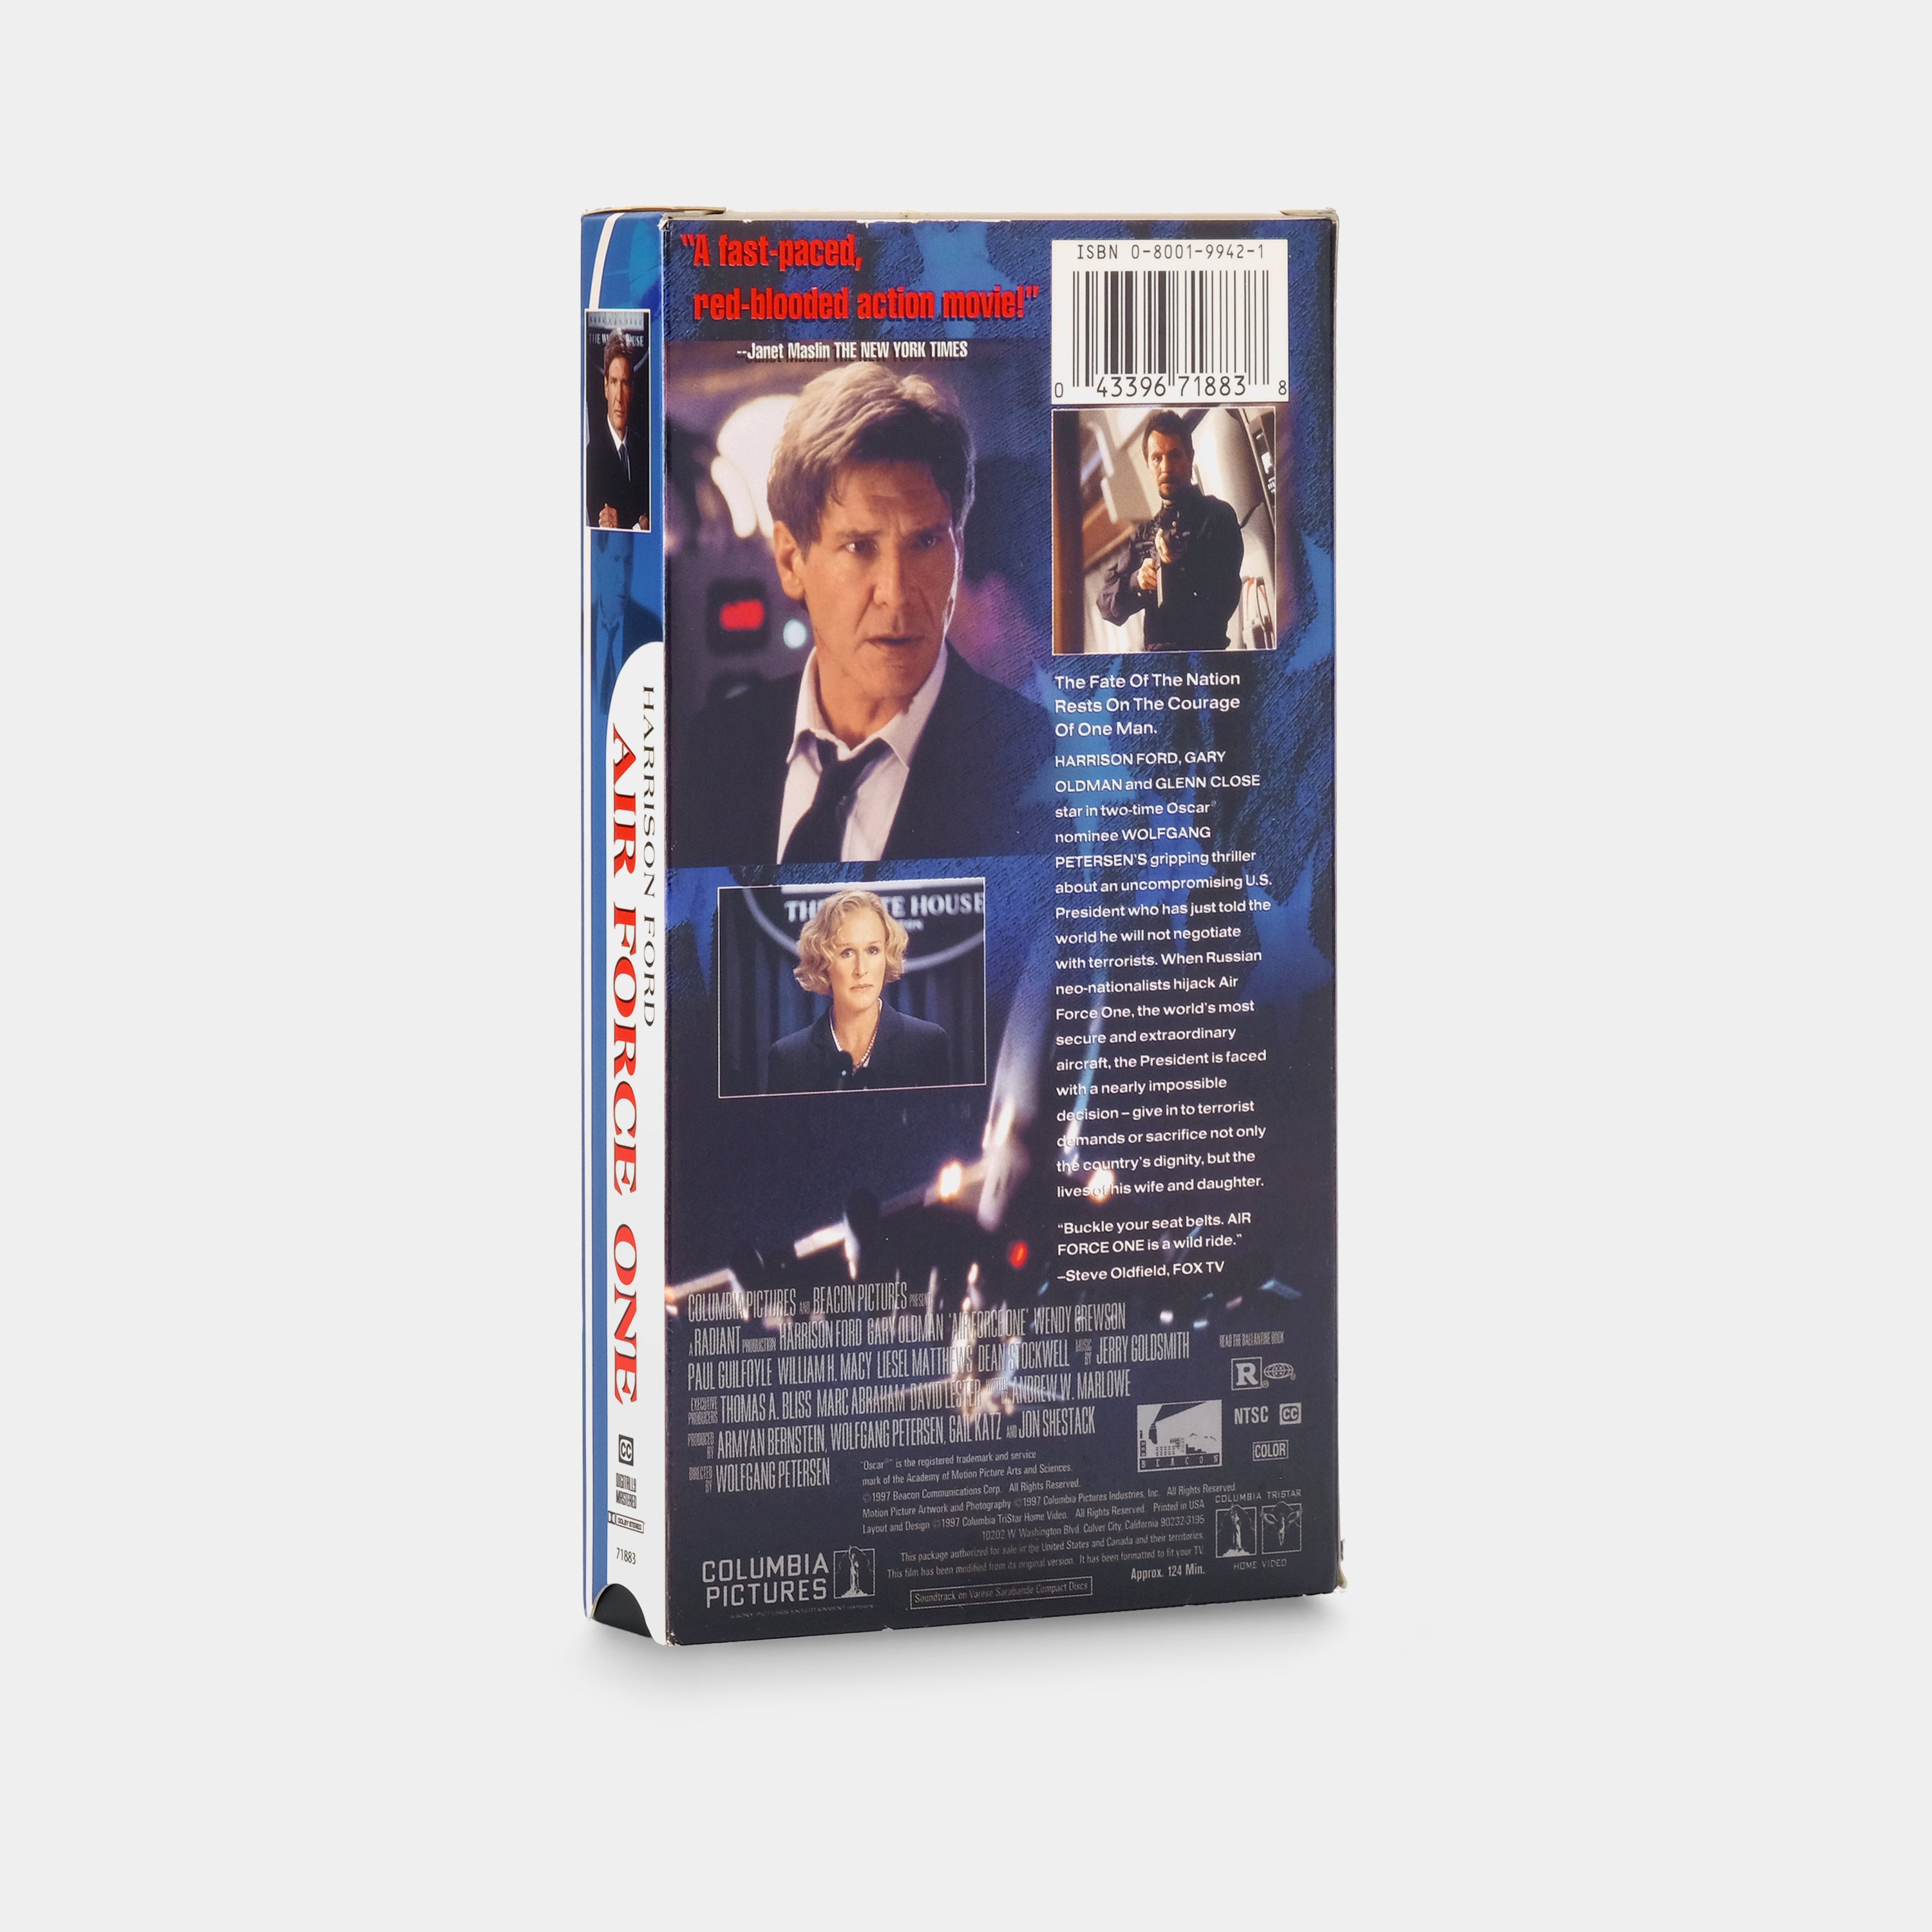 Air Force One VHS Tape